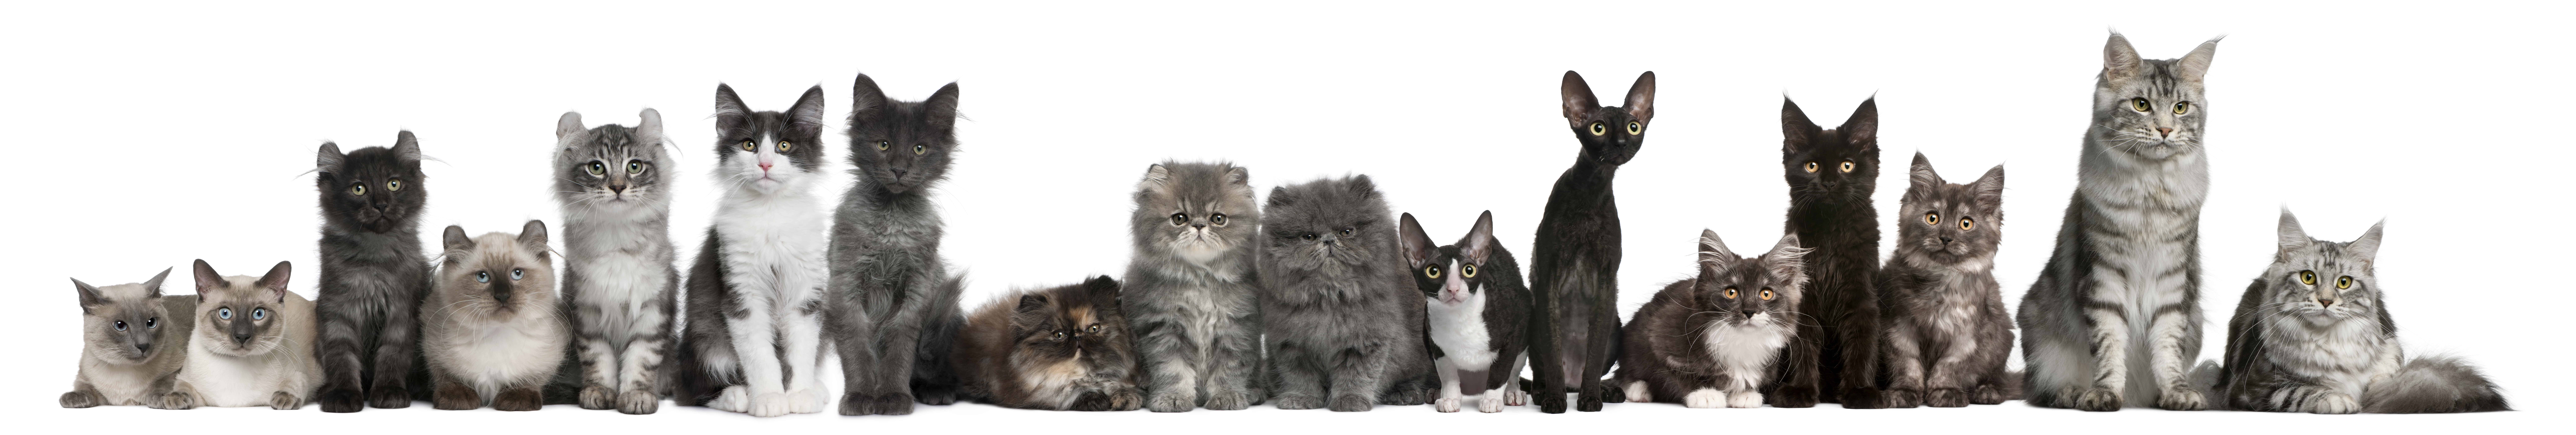 group of cats petcare